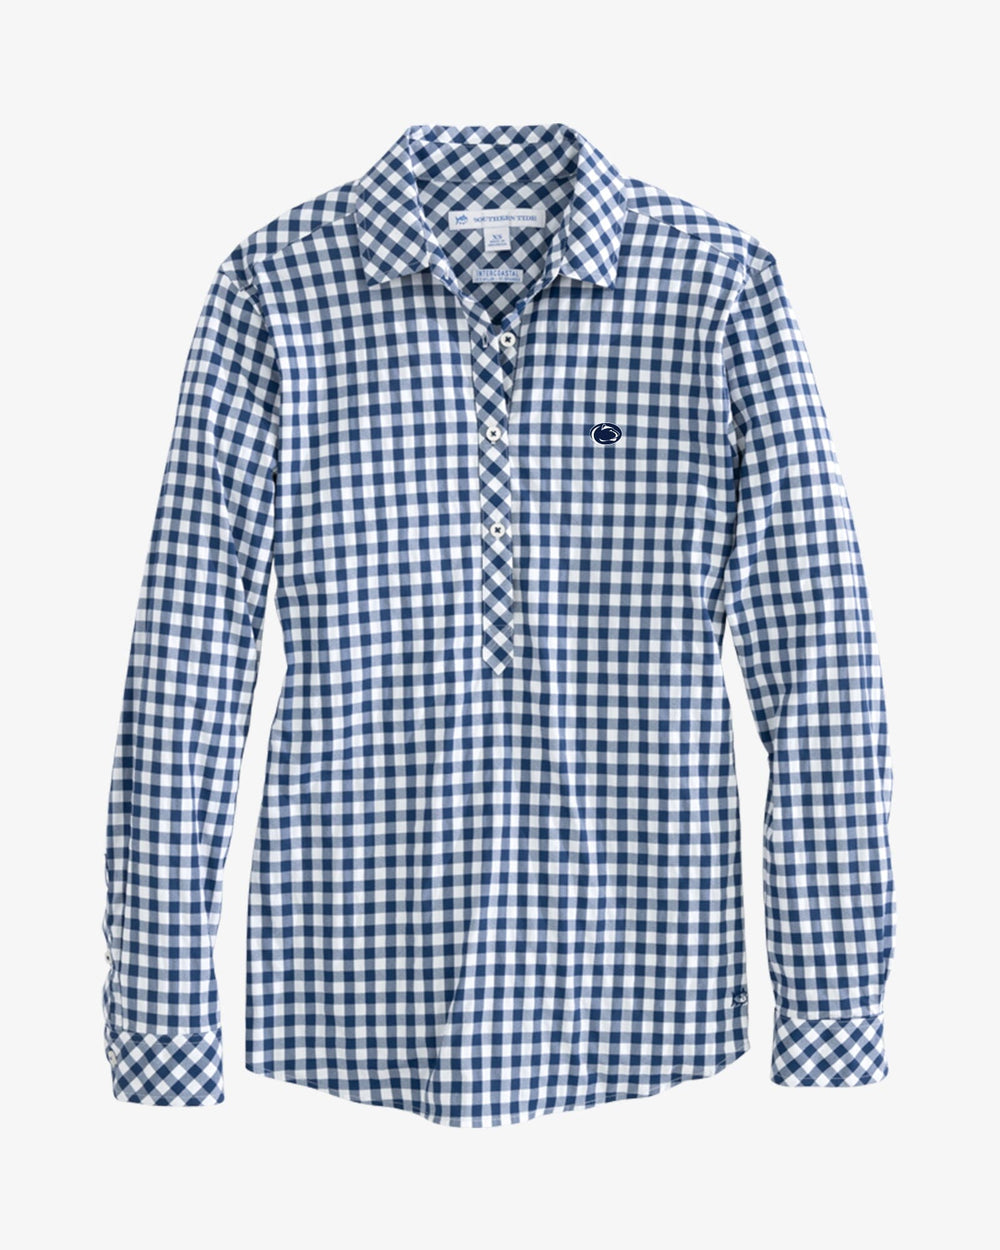 The front view of the Penn State Intercoastal Hadley Popover Shirt by Southern Tide - Yacht Blue